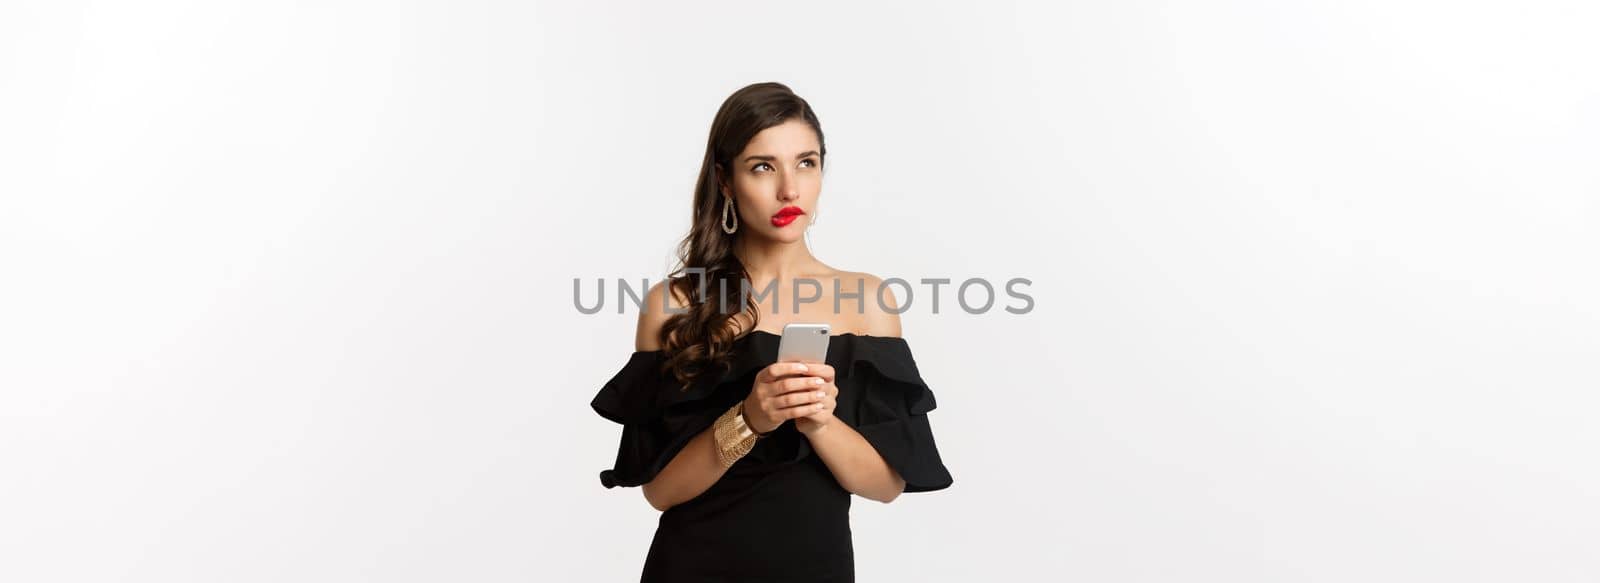 Thoughtful young woman using smartphone and thinking, looking up and pondering, standing over white background. Copy space